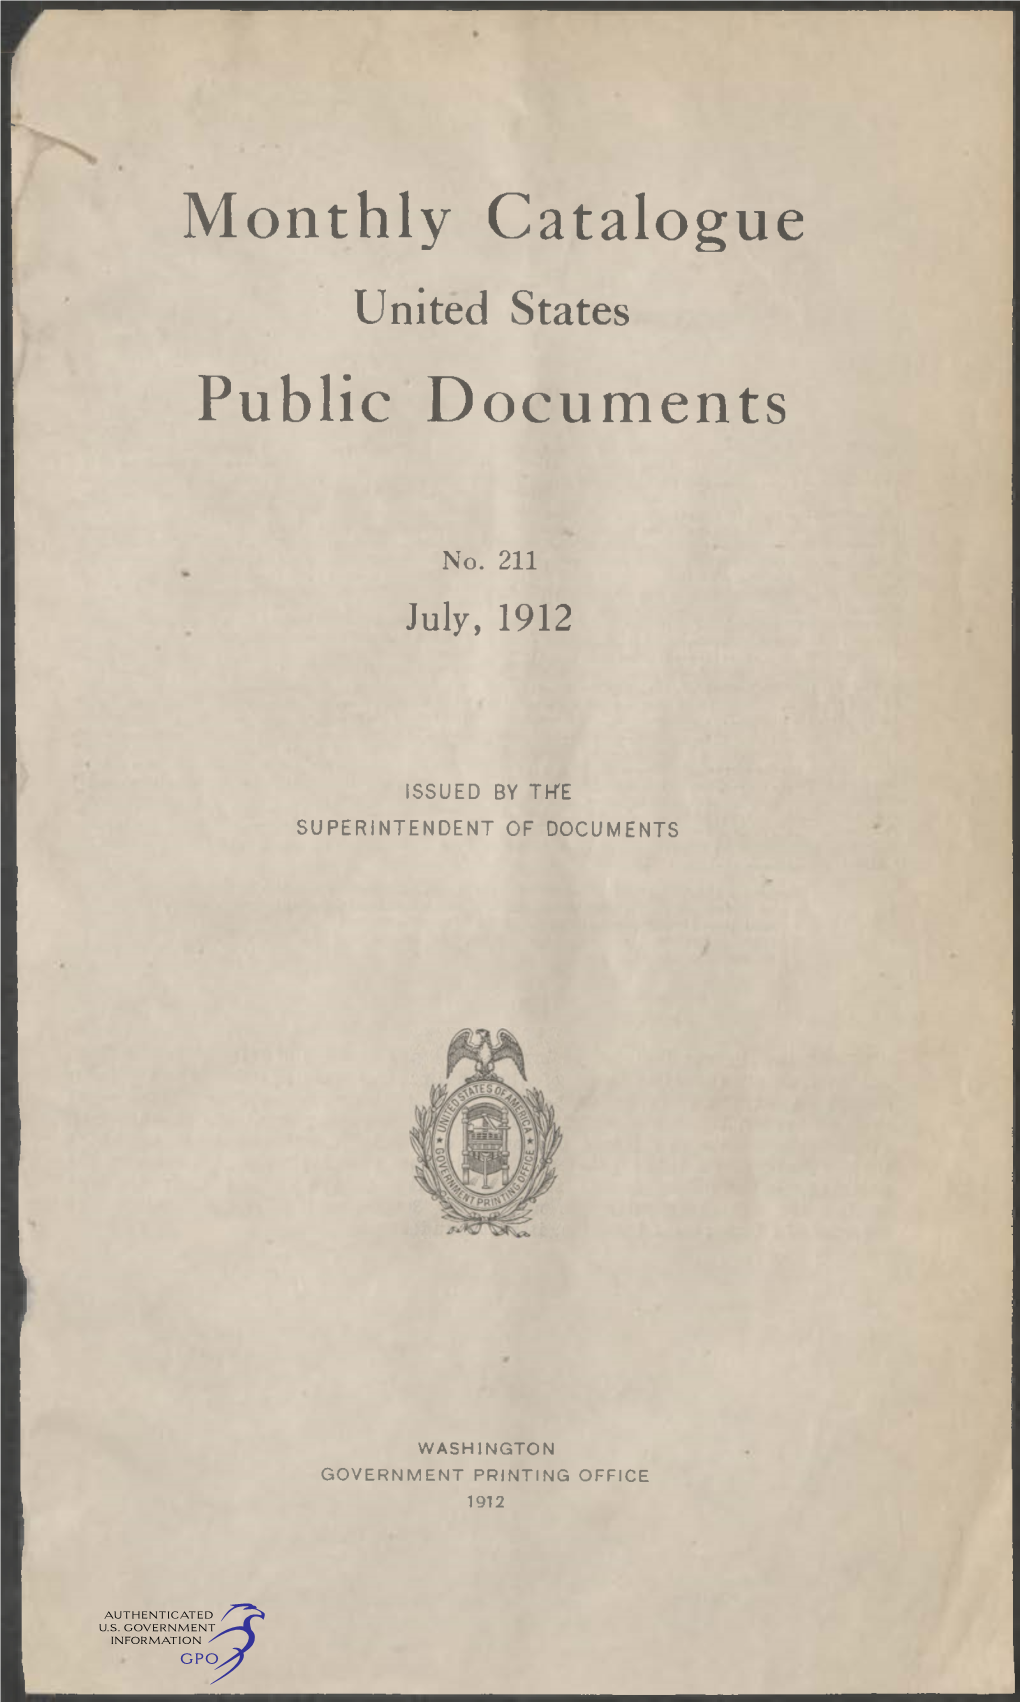 Monthly Catalogue, United States Public Documents, July 1912